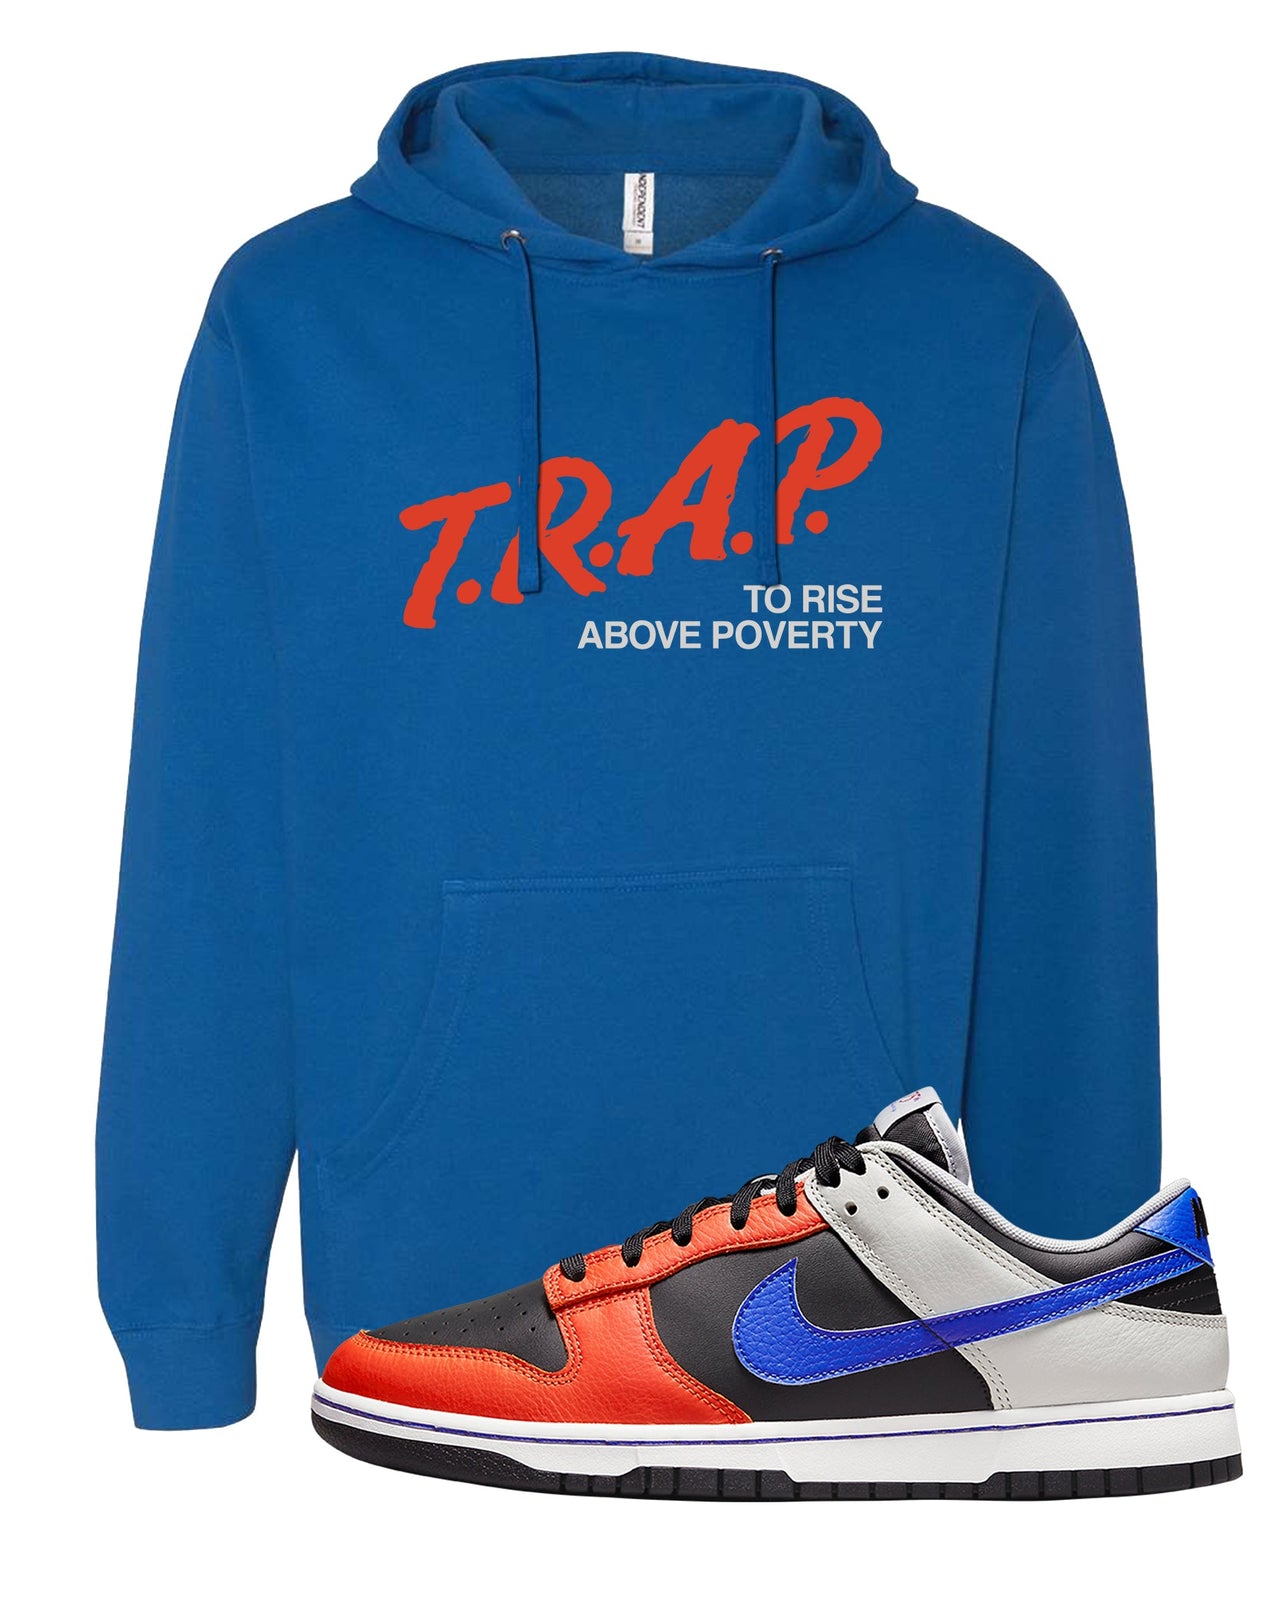 75th Anniversary Low Dunks Hoodie | Trap To Rise Above Poverty, Royal